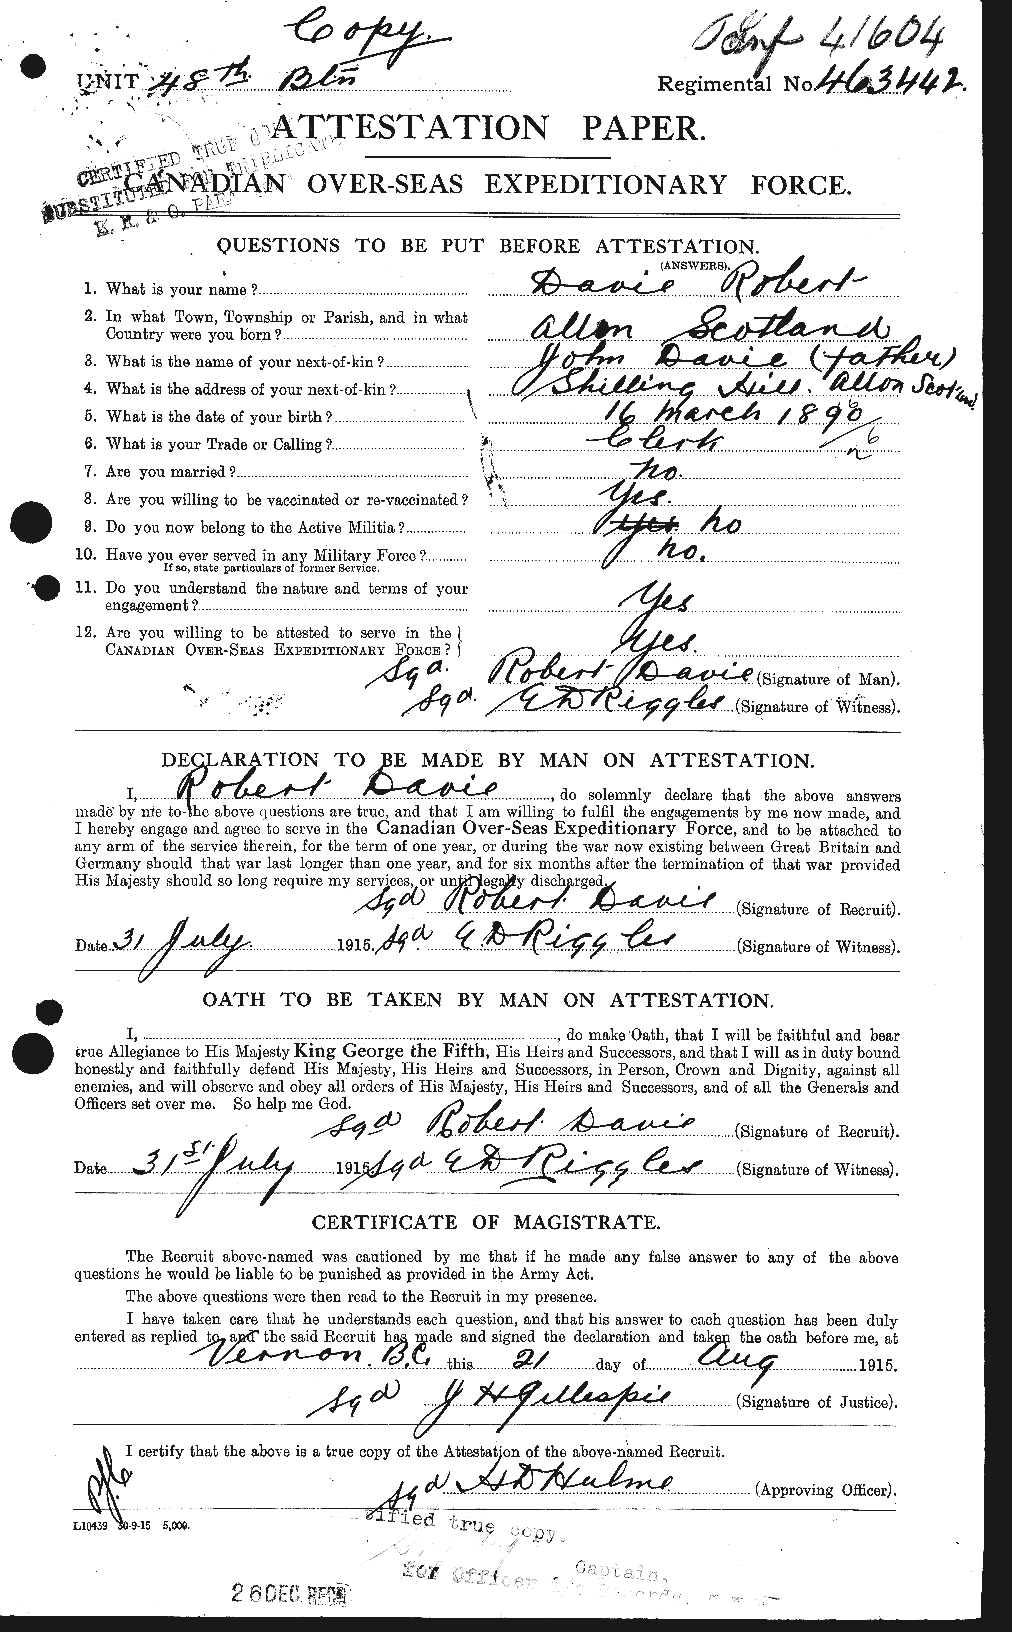 Personnel Records of the First World War - CEF 278842a